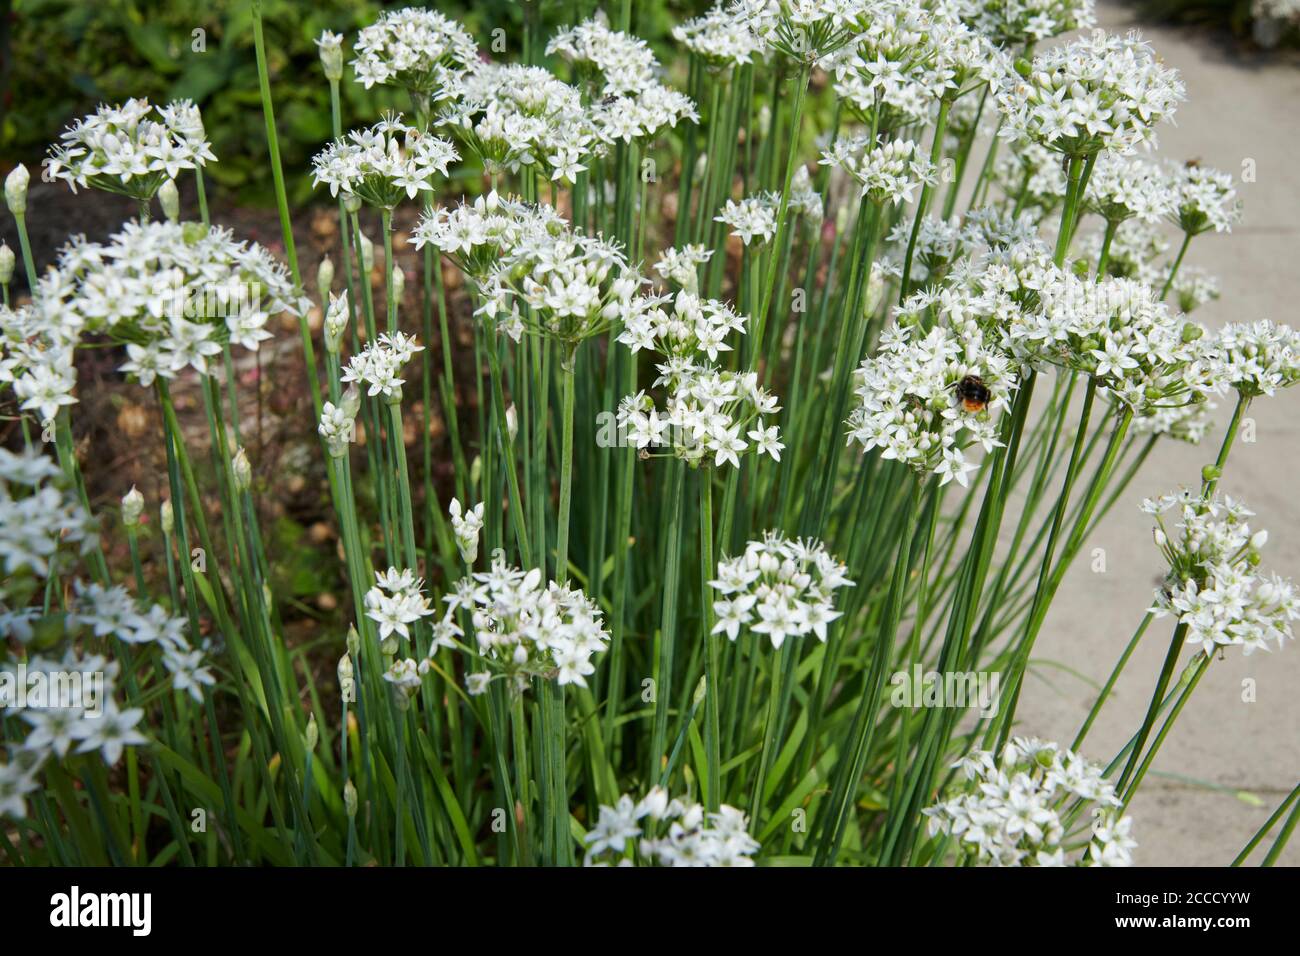 White (Alba) Chinese chives (Allium tuberosum) growing in a garden border with honey bees (Apis spp)  on the flowers. Stock Photo